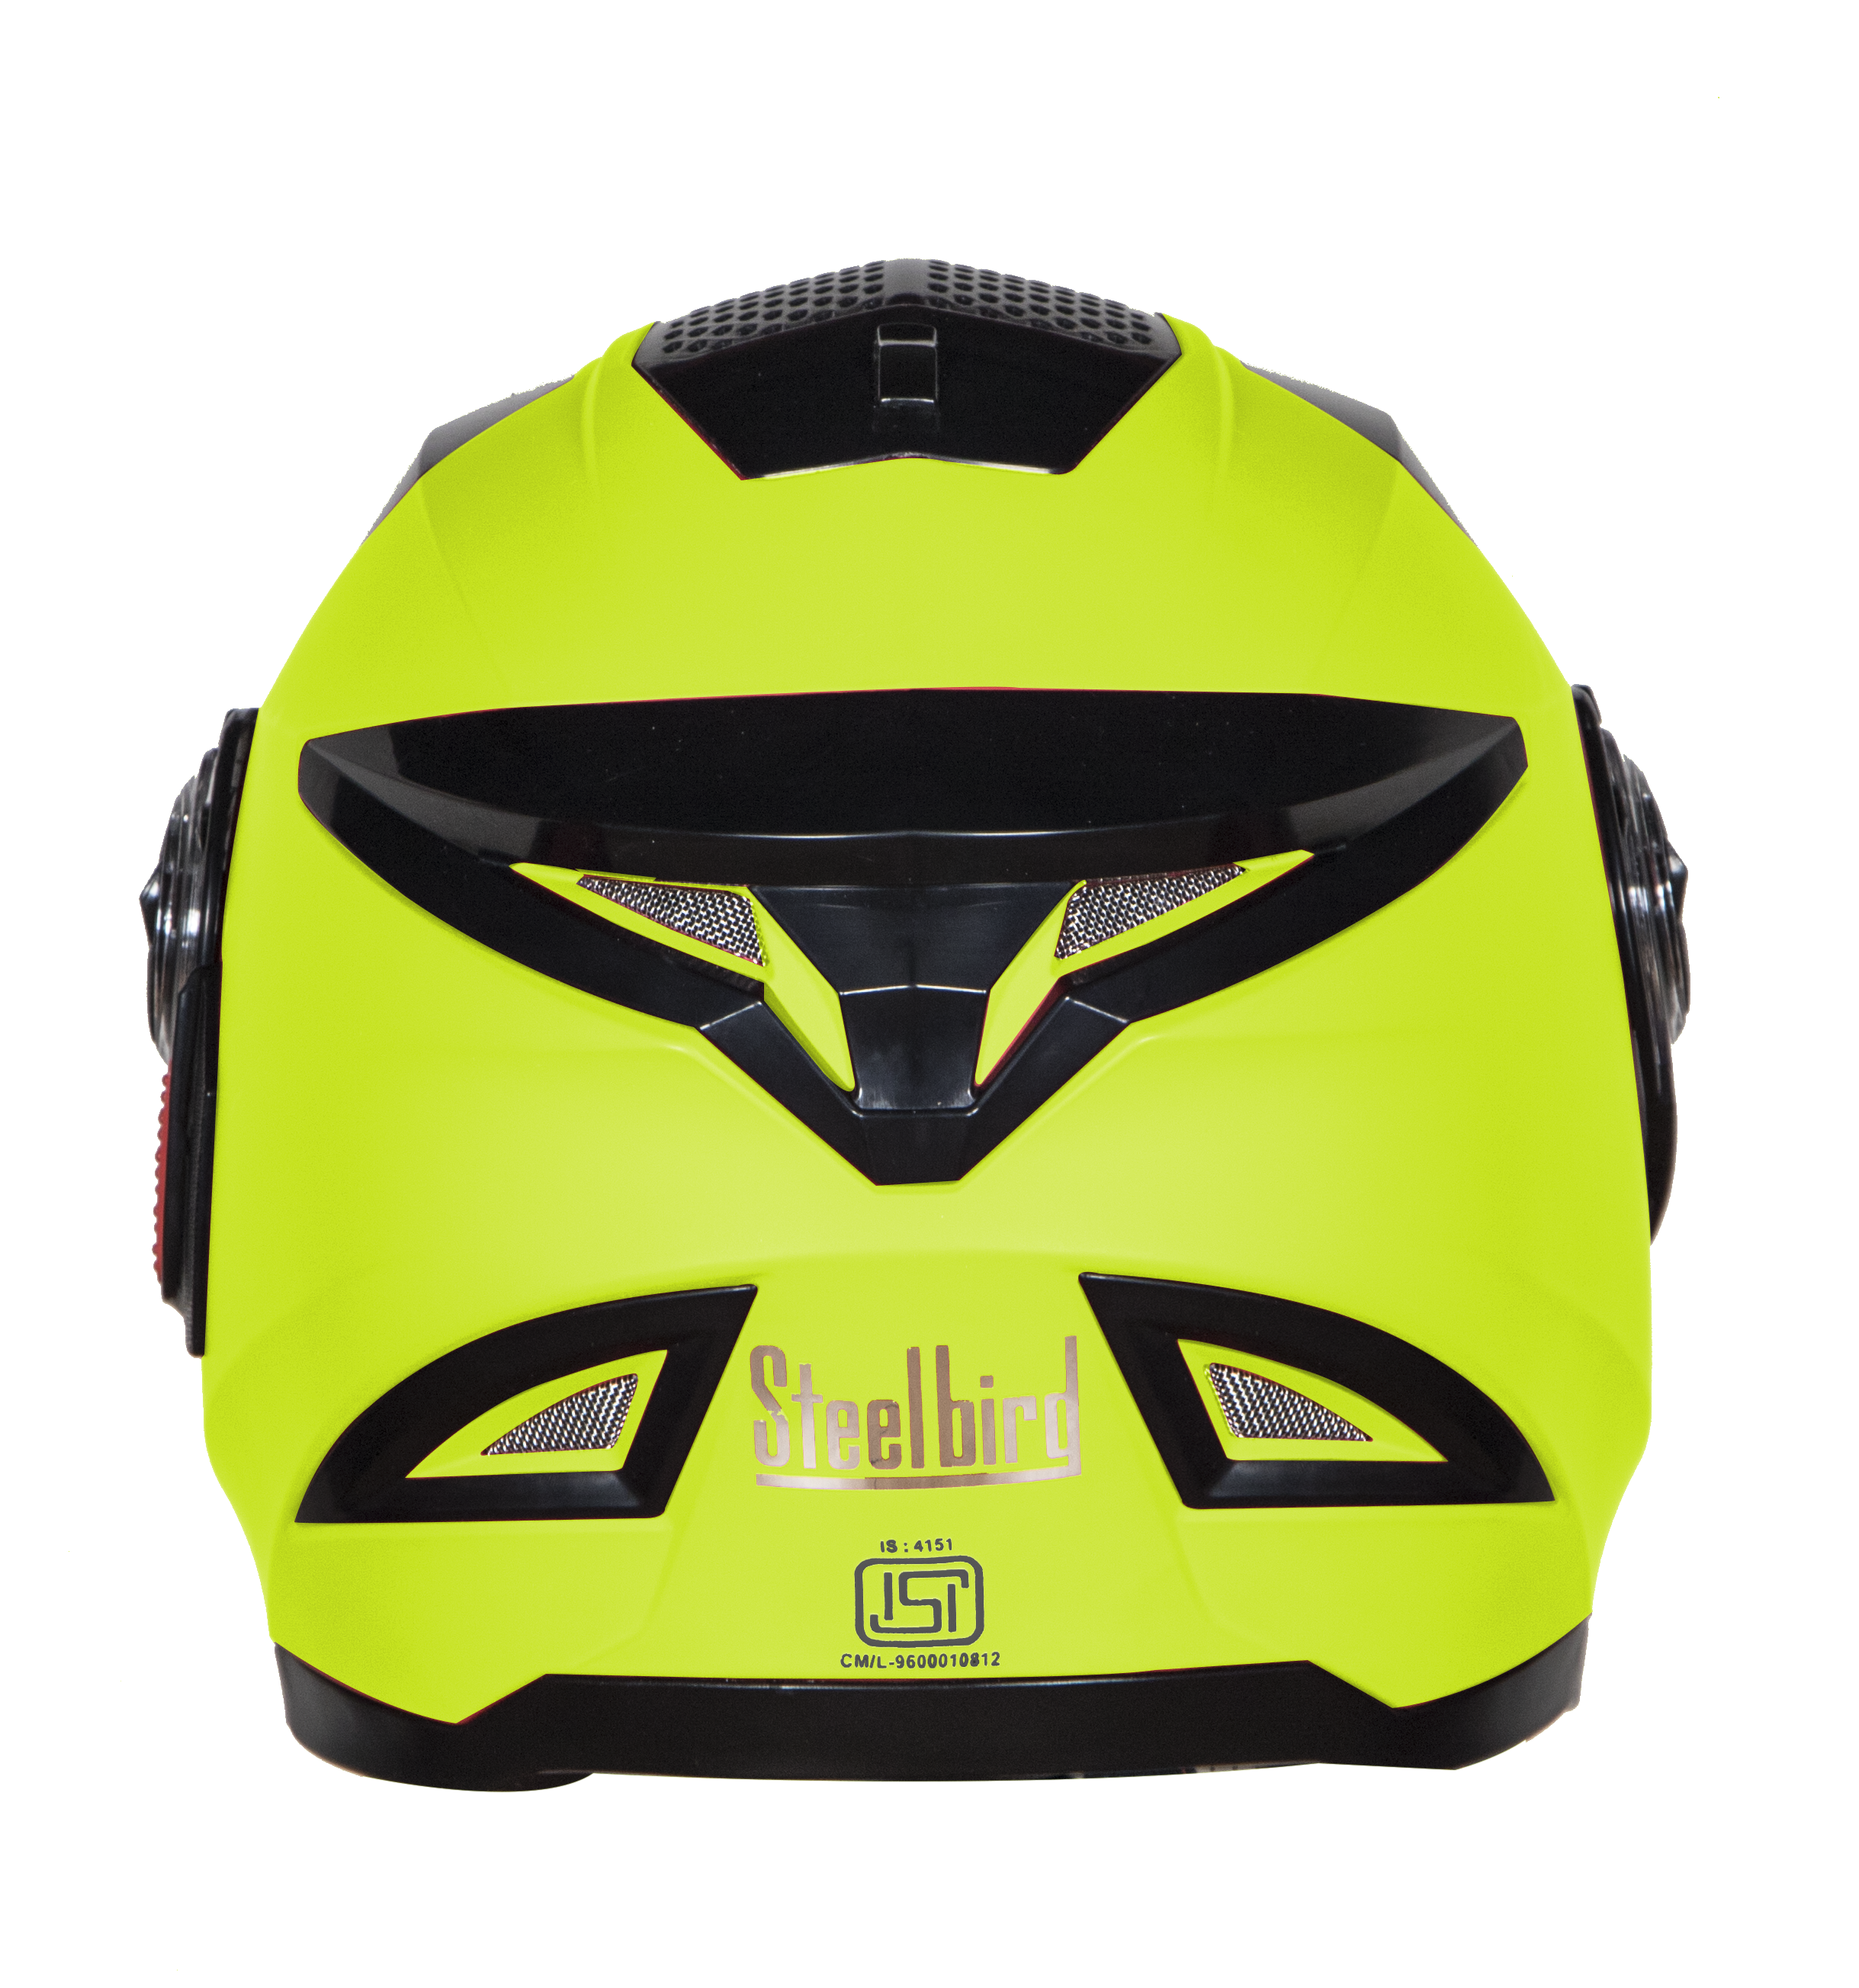 SBH-17 OPT GLOSSY FLUO NEON (WITH EXTRA FREE CABLE LOCK AND CLEAR VISOR)